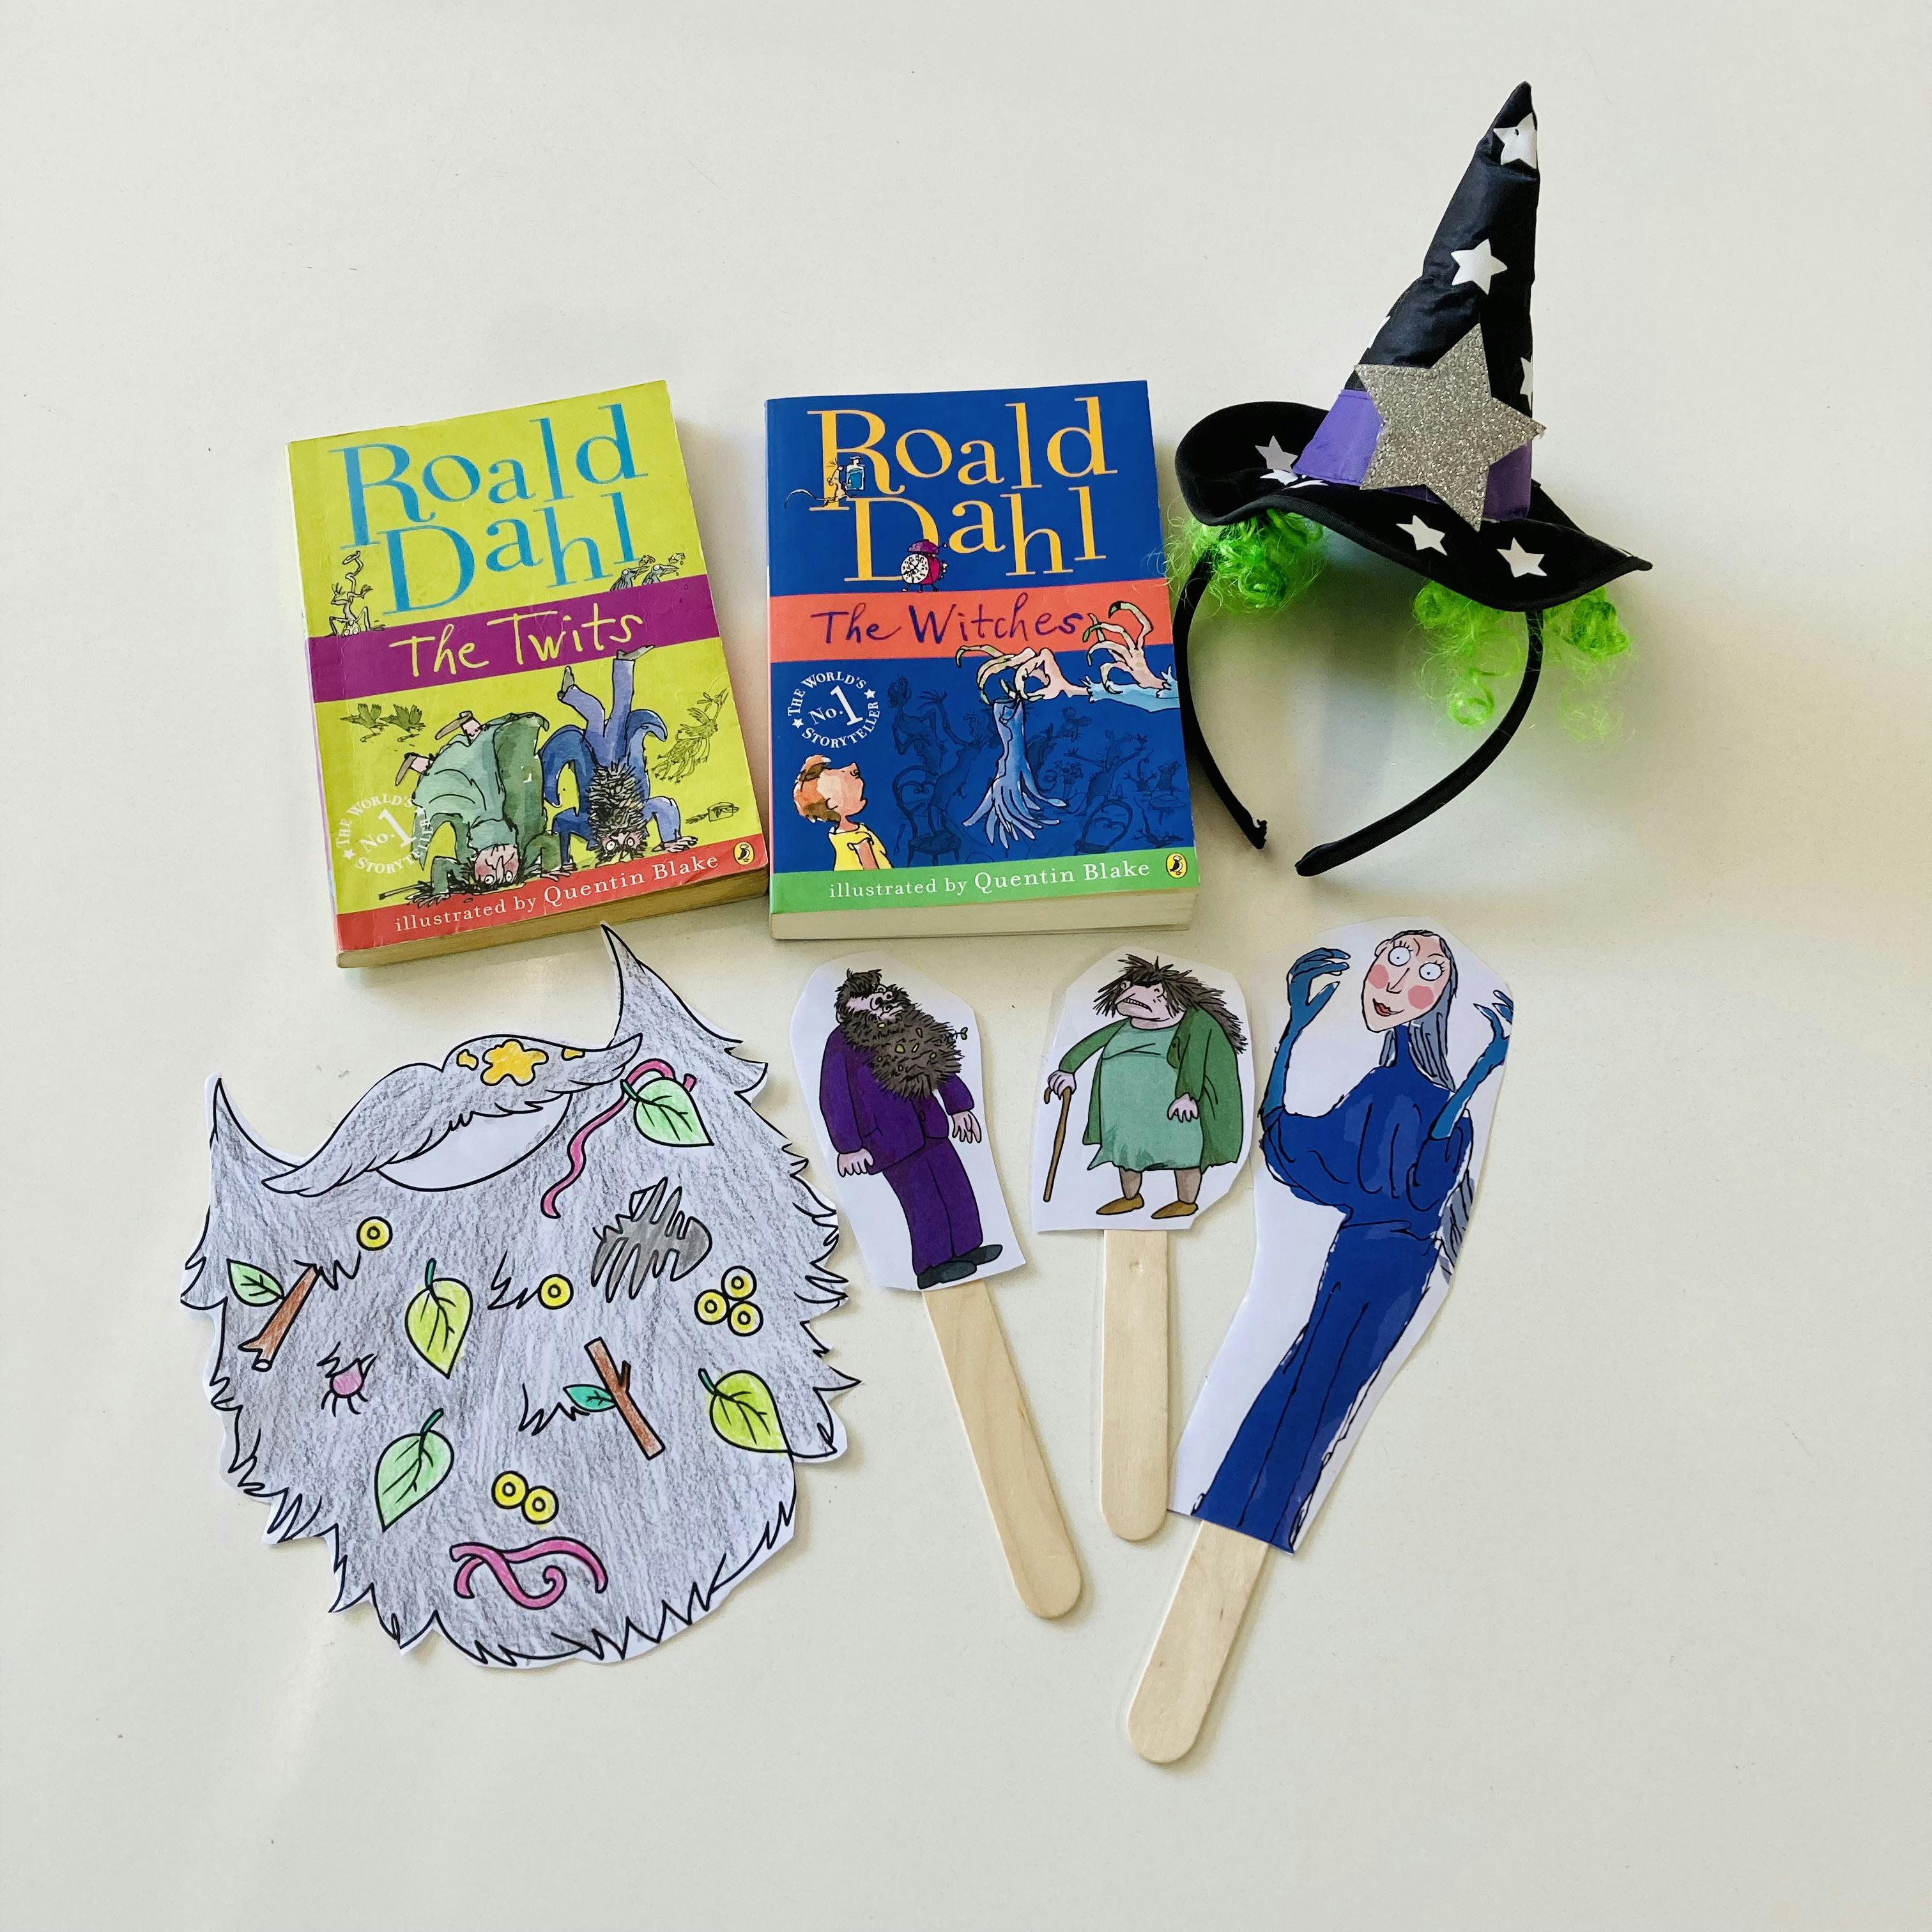 Using Expression With Roald Dahl Characters - The Twits meet The Witches